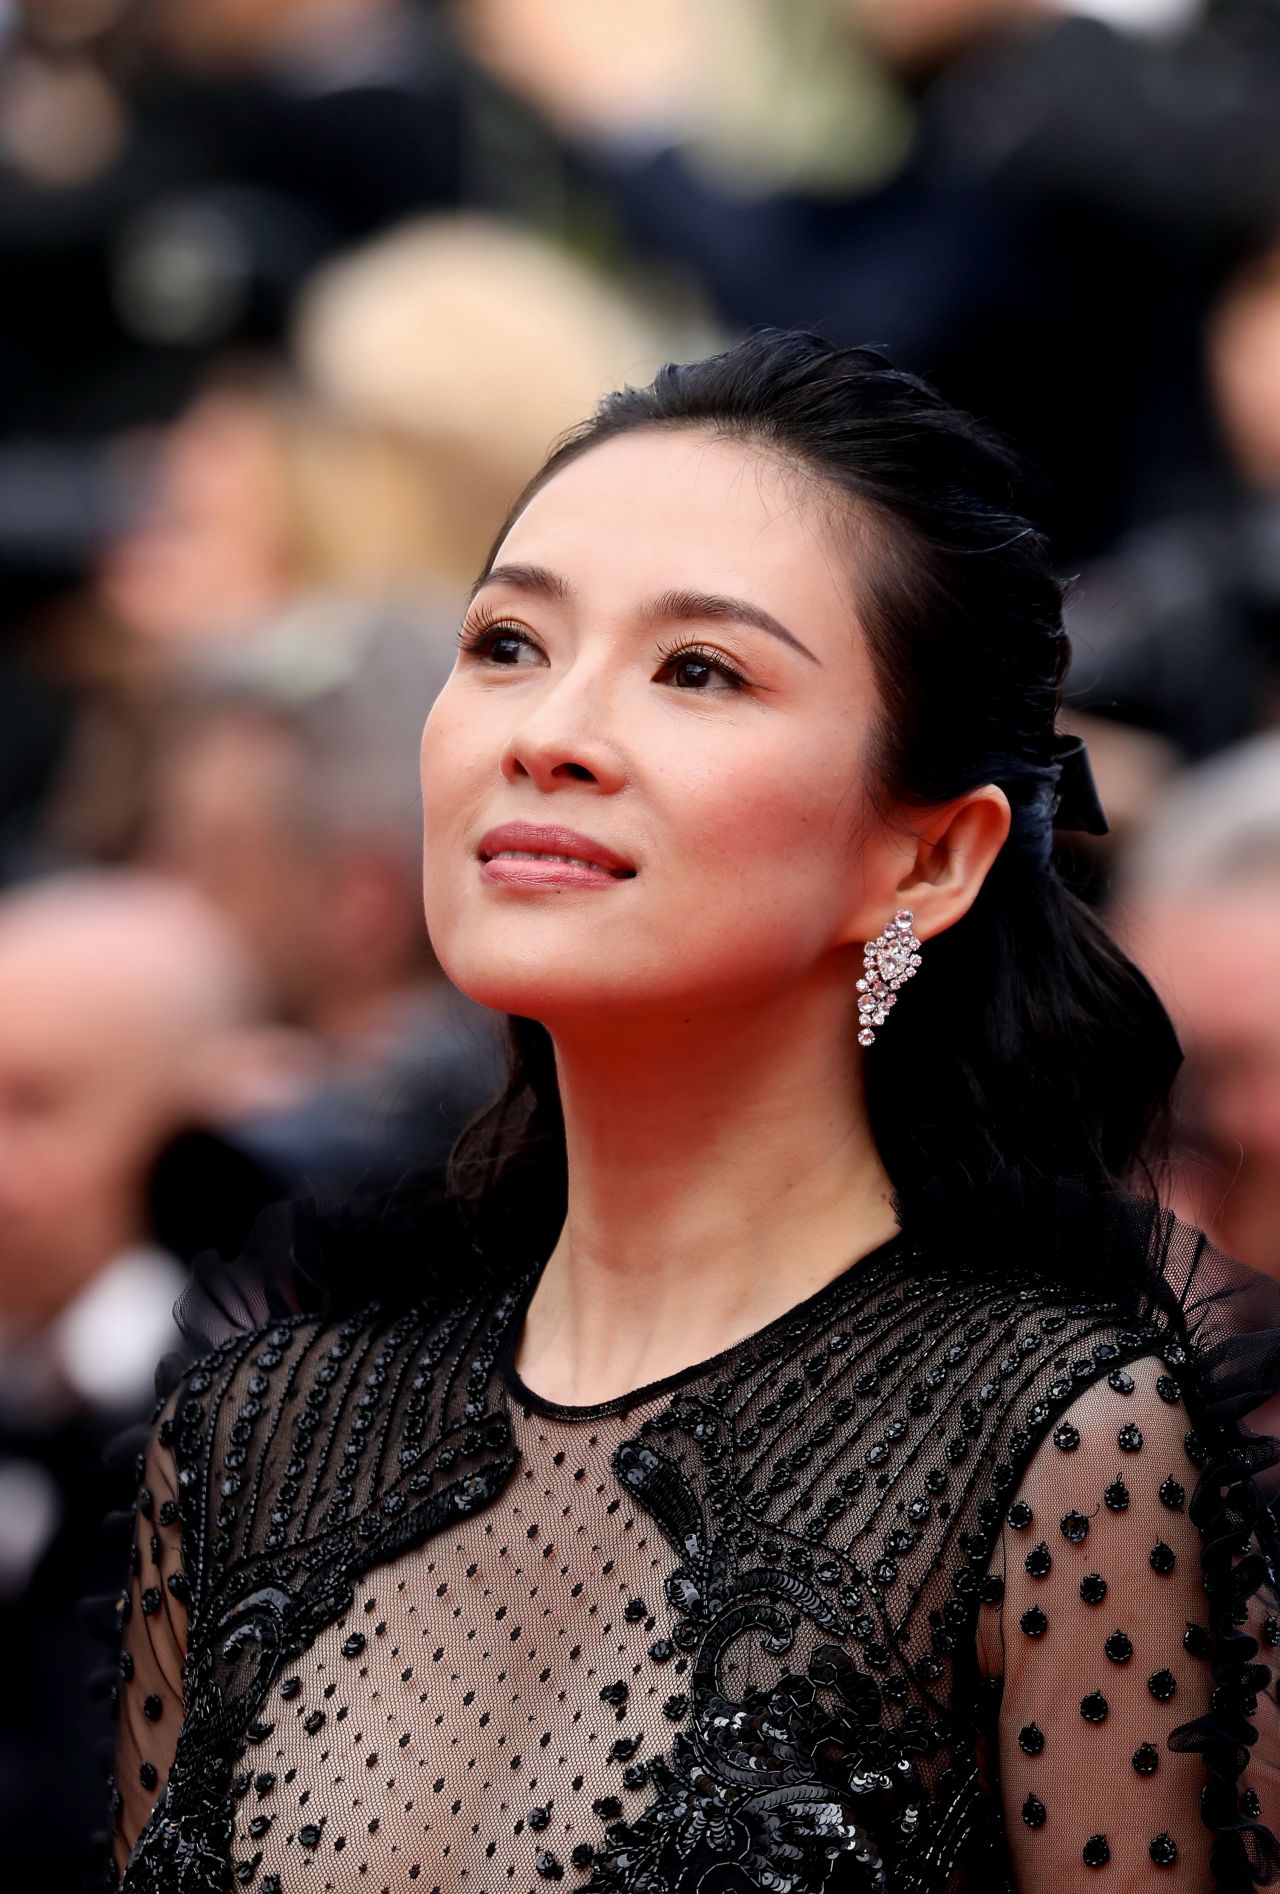 Zhang Ziyi - "Once Upon a Time in Hollywood" Red Carpet at Cannes...